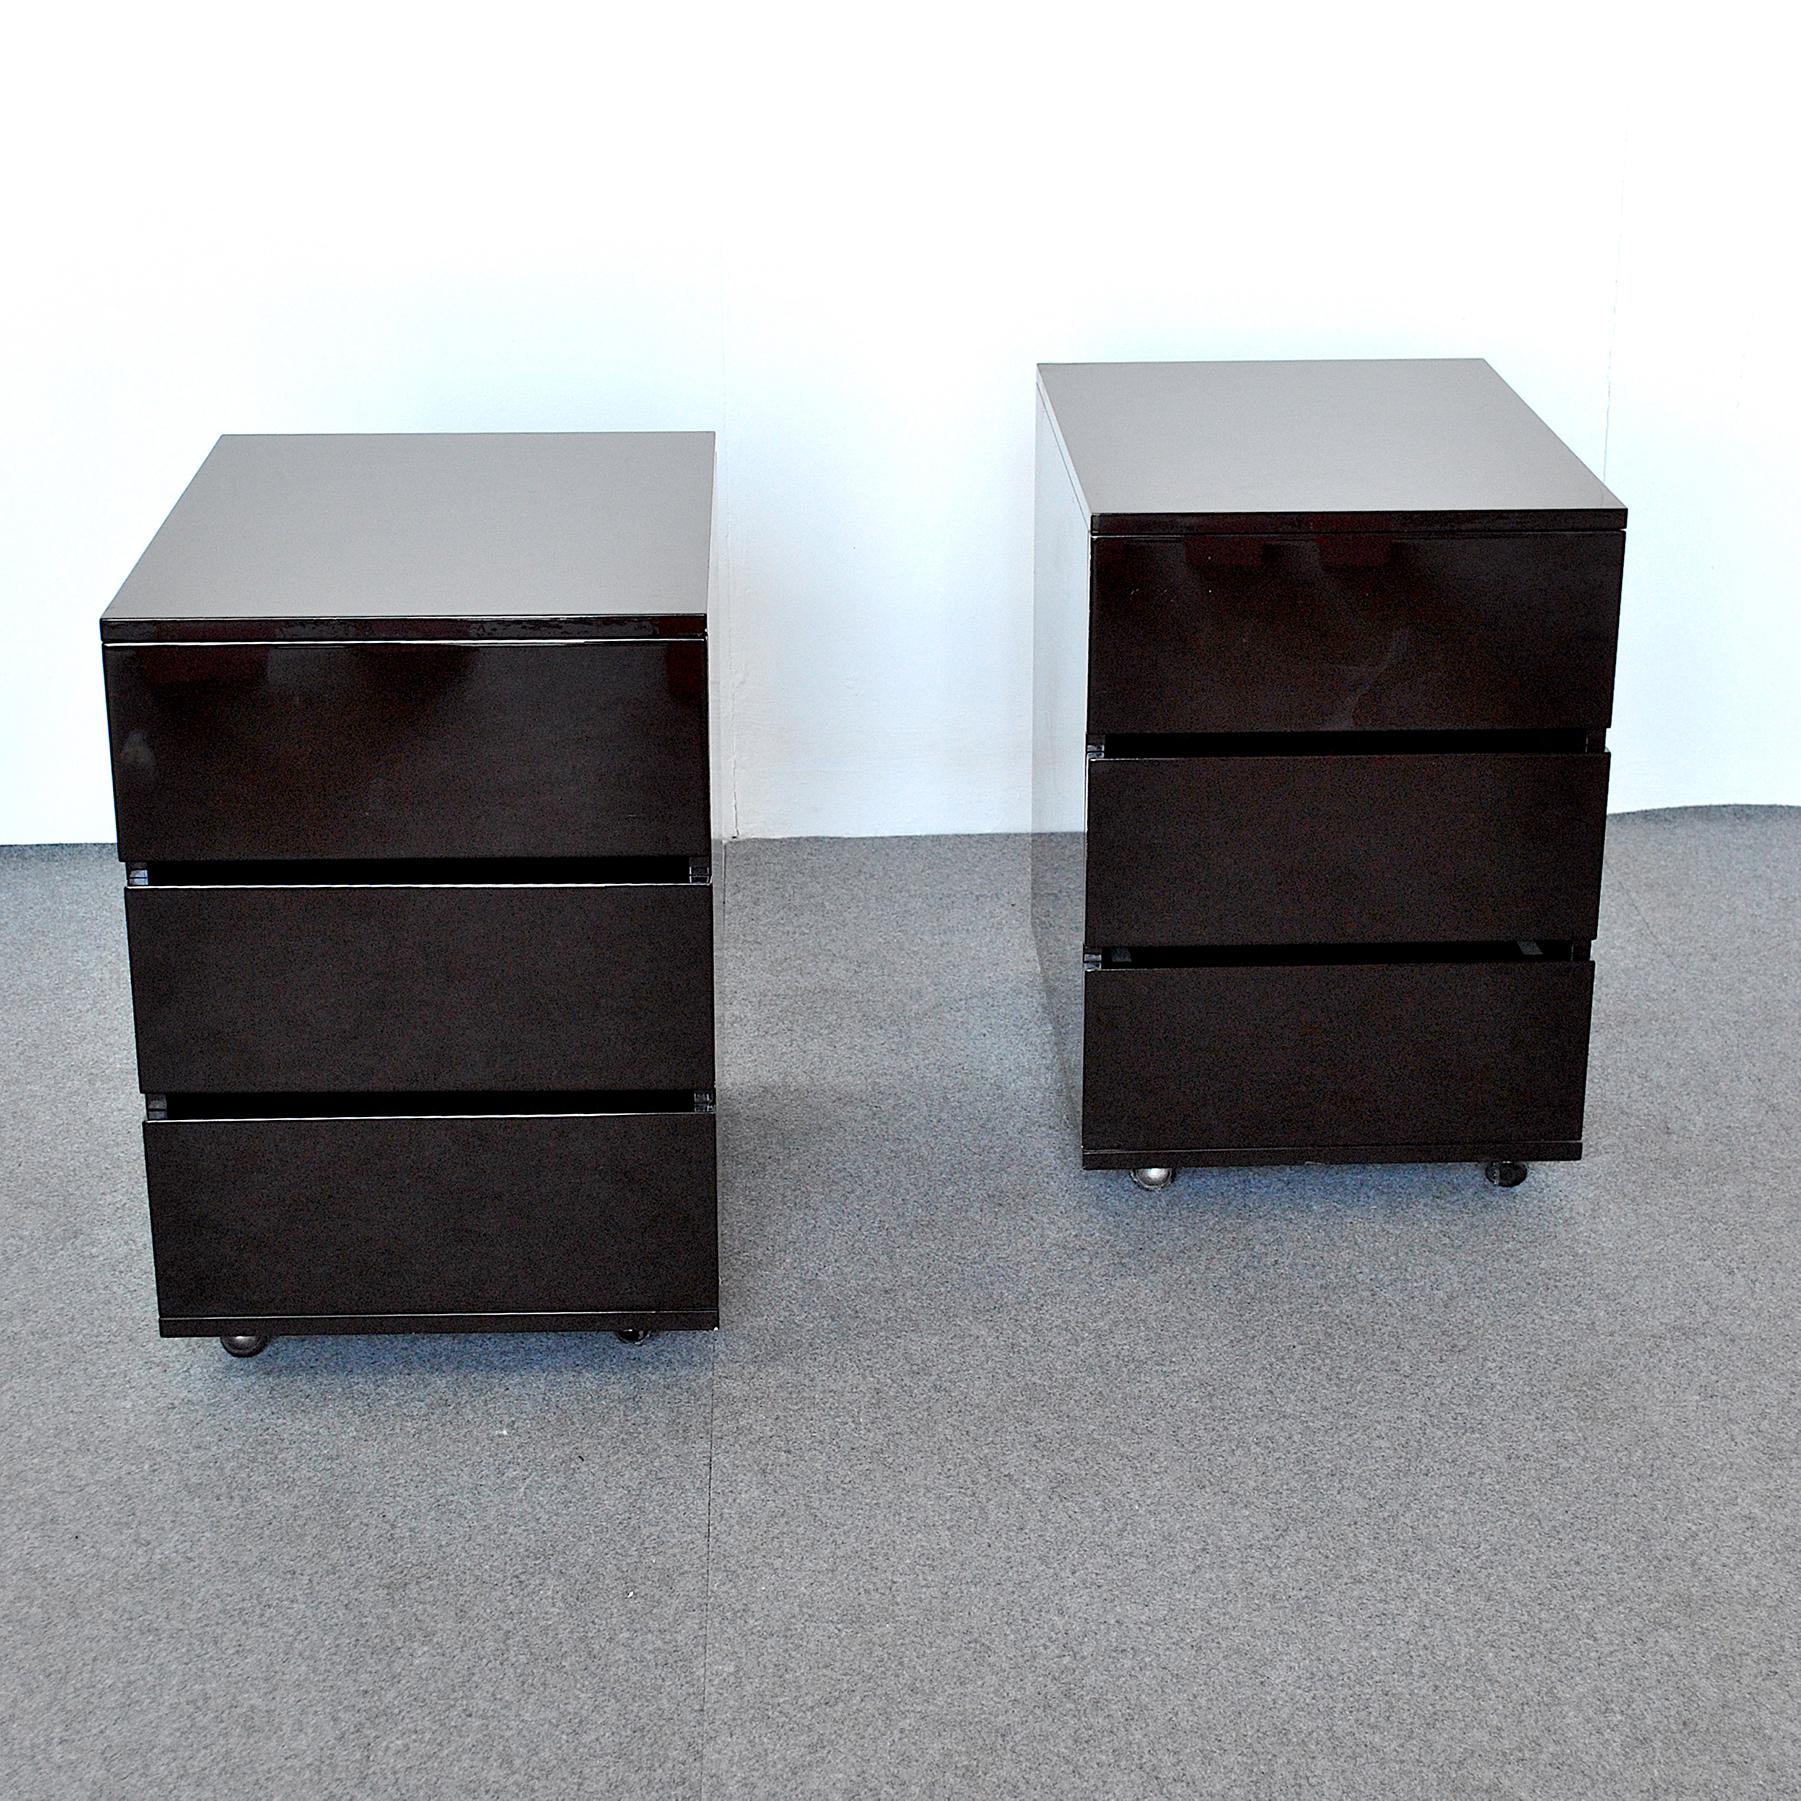 Set of two night stands cabinets with three drawers in dark brown lacquered wood, Italian production from the 1980s.